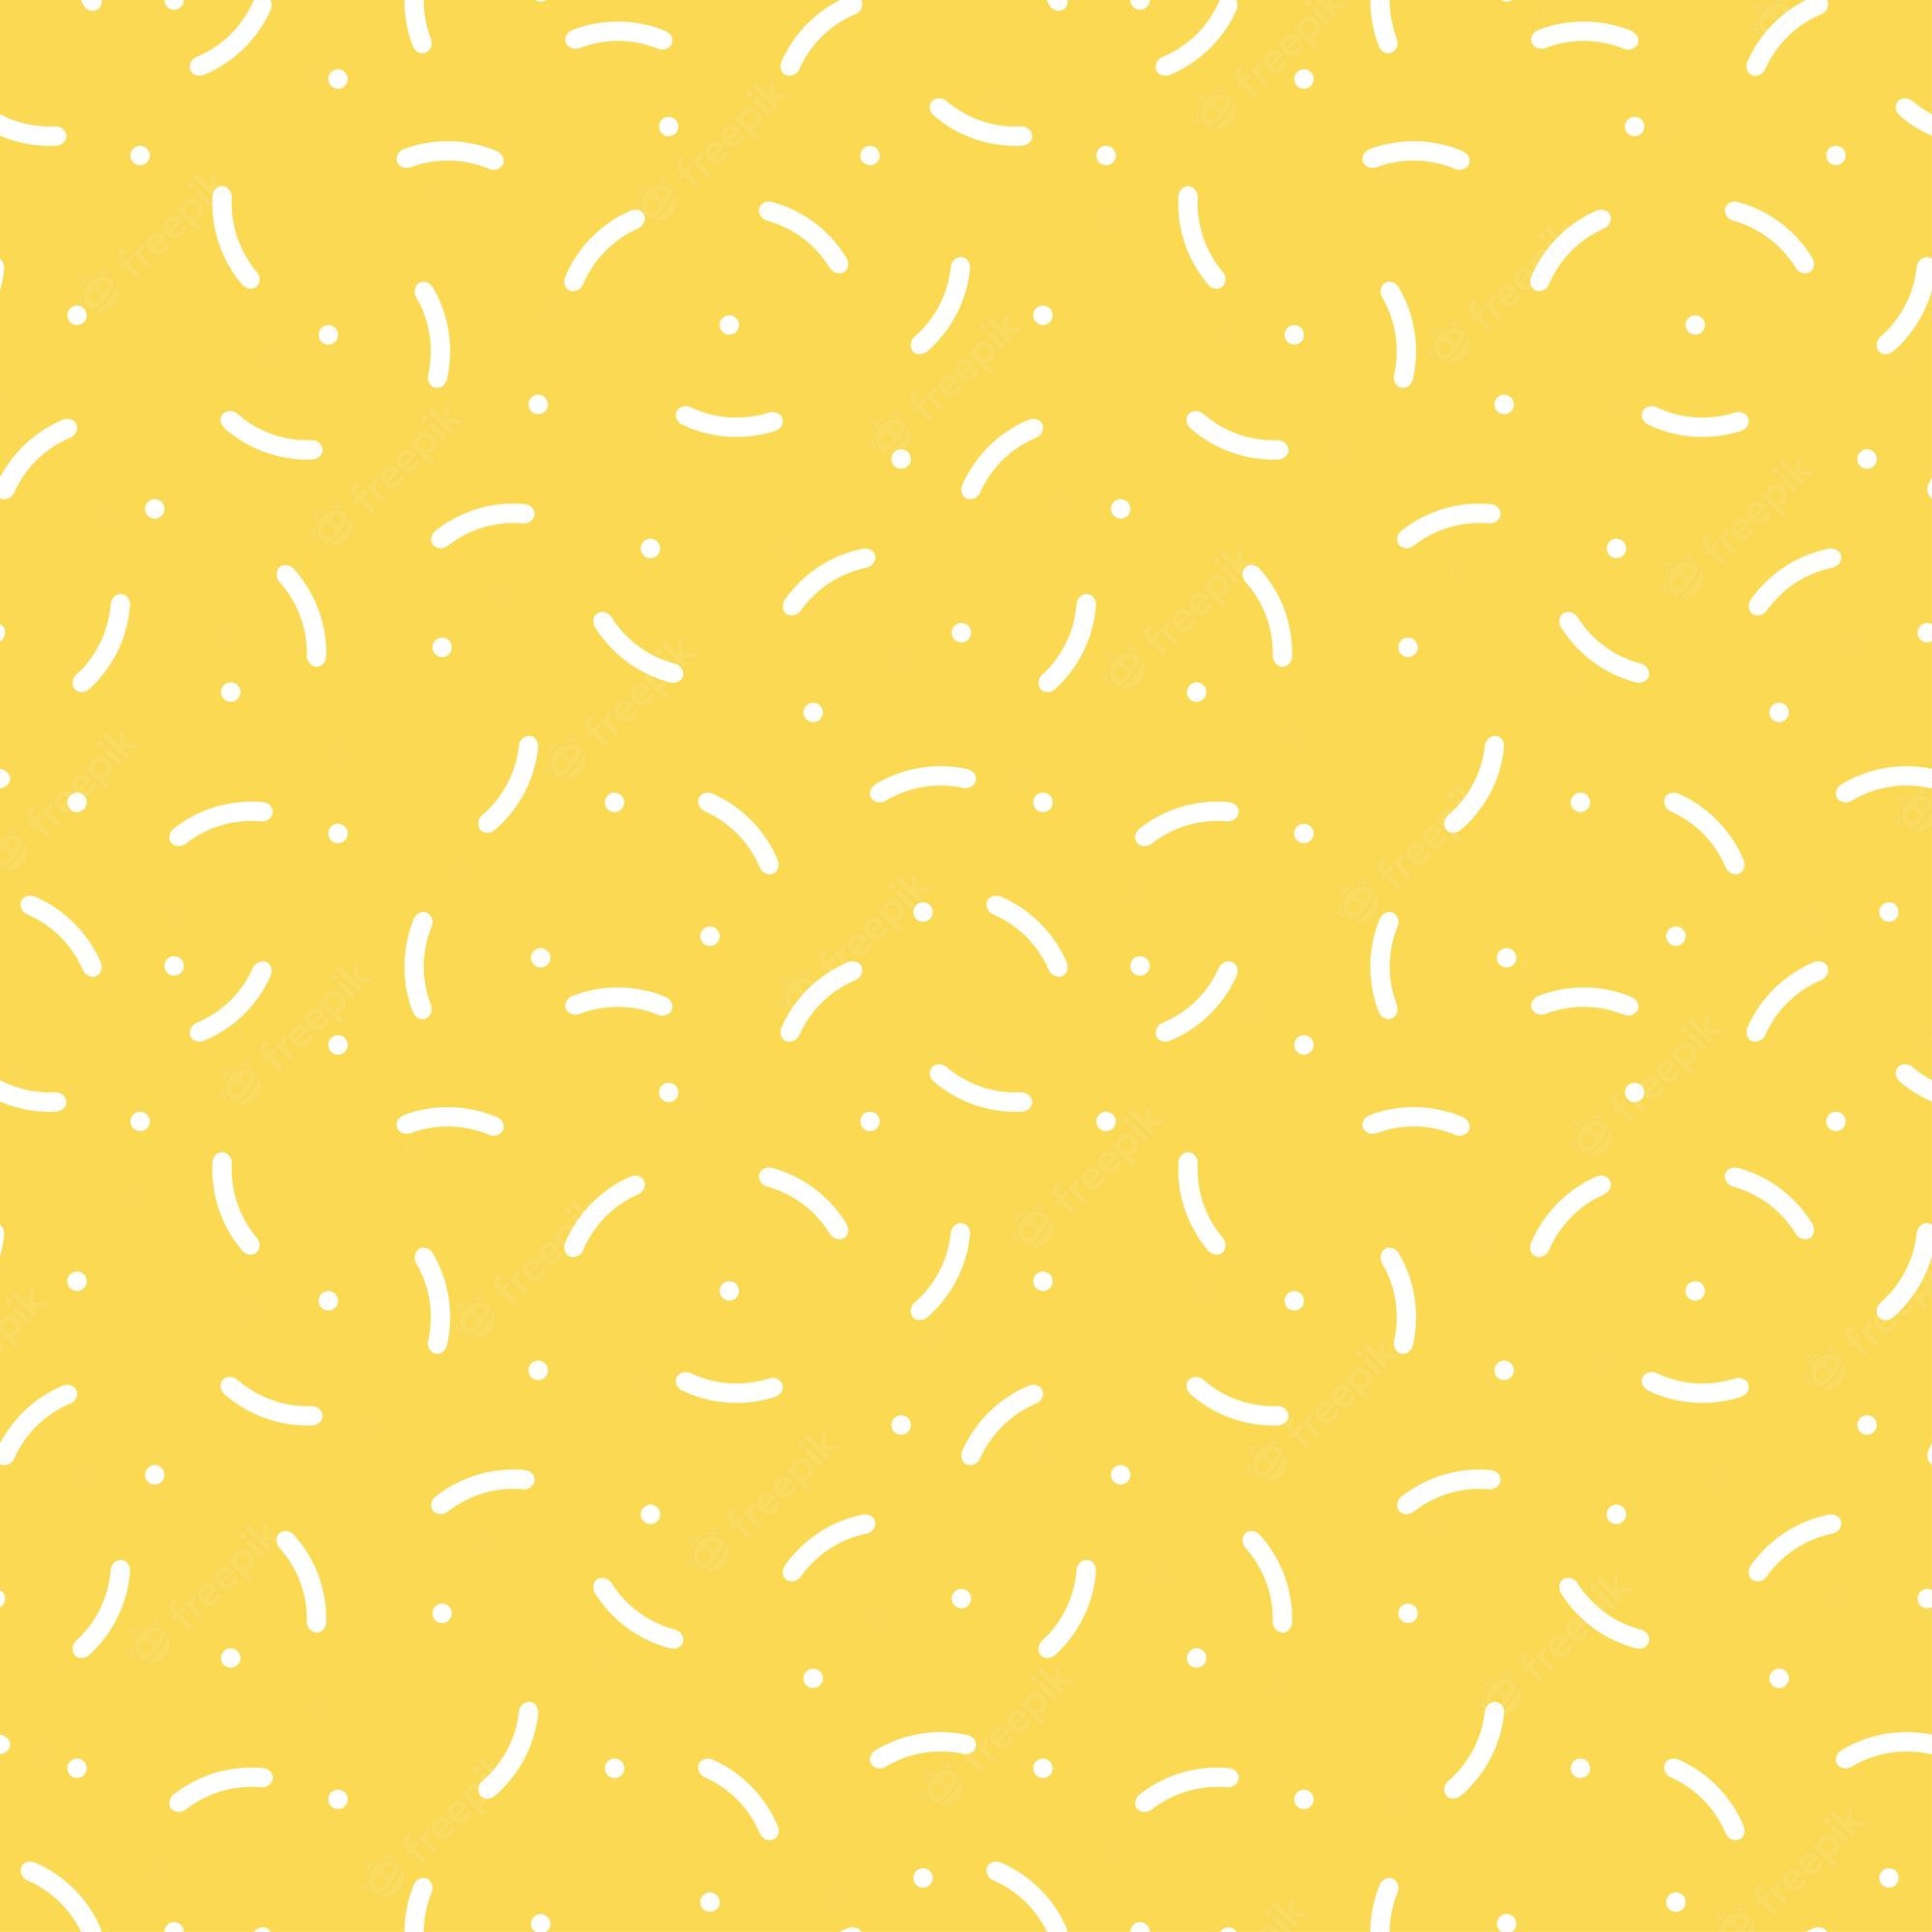 Cute yellow background Vectors & Illustrations for Free Download